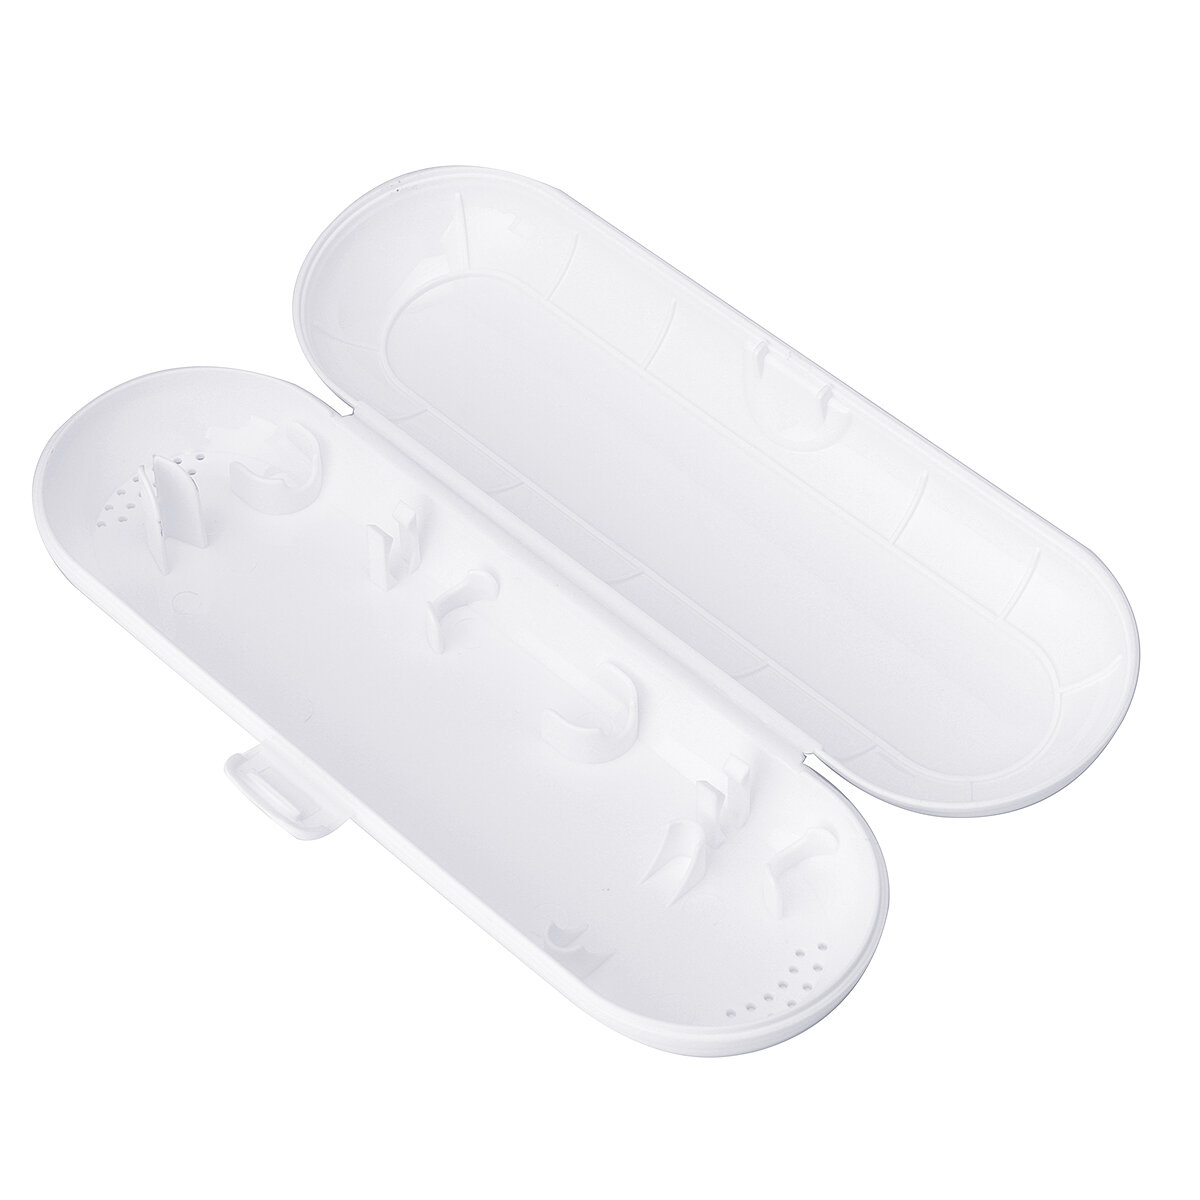 Original Environment Friendly PVC SOOCARE Electric Toothbrush Holder Case WHITE For SOOCARE SOOCAS X